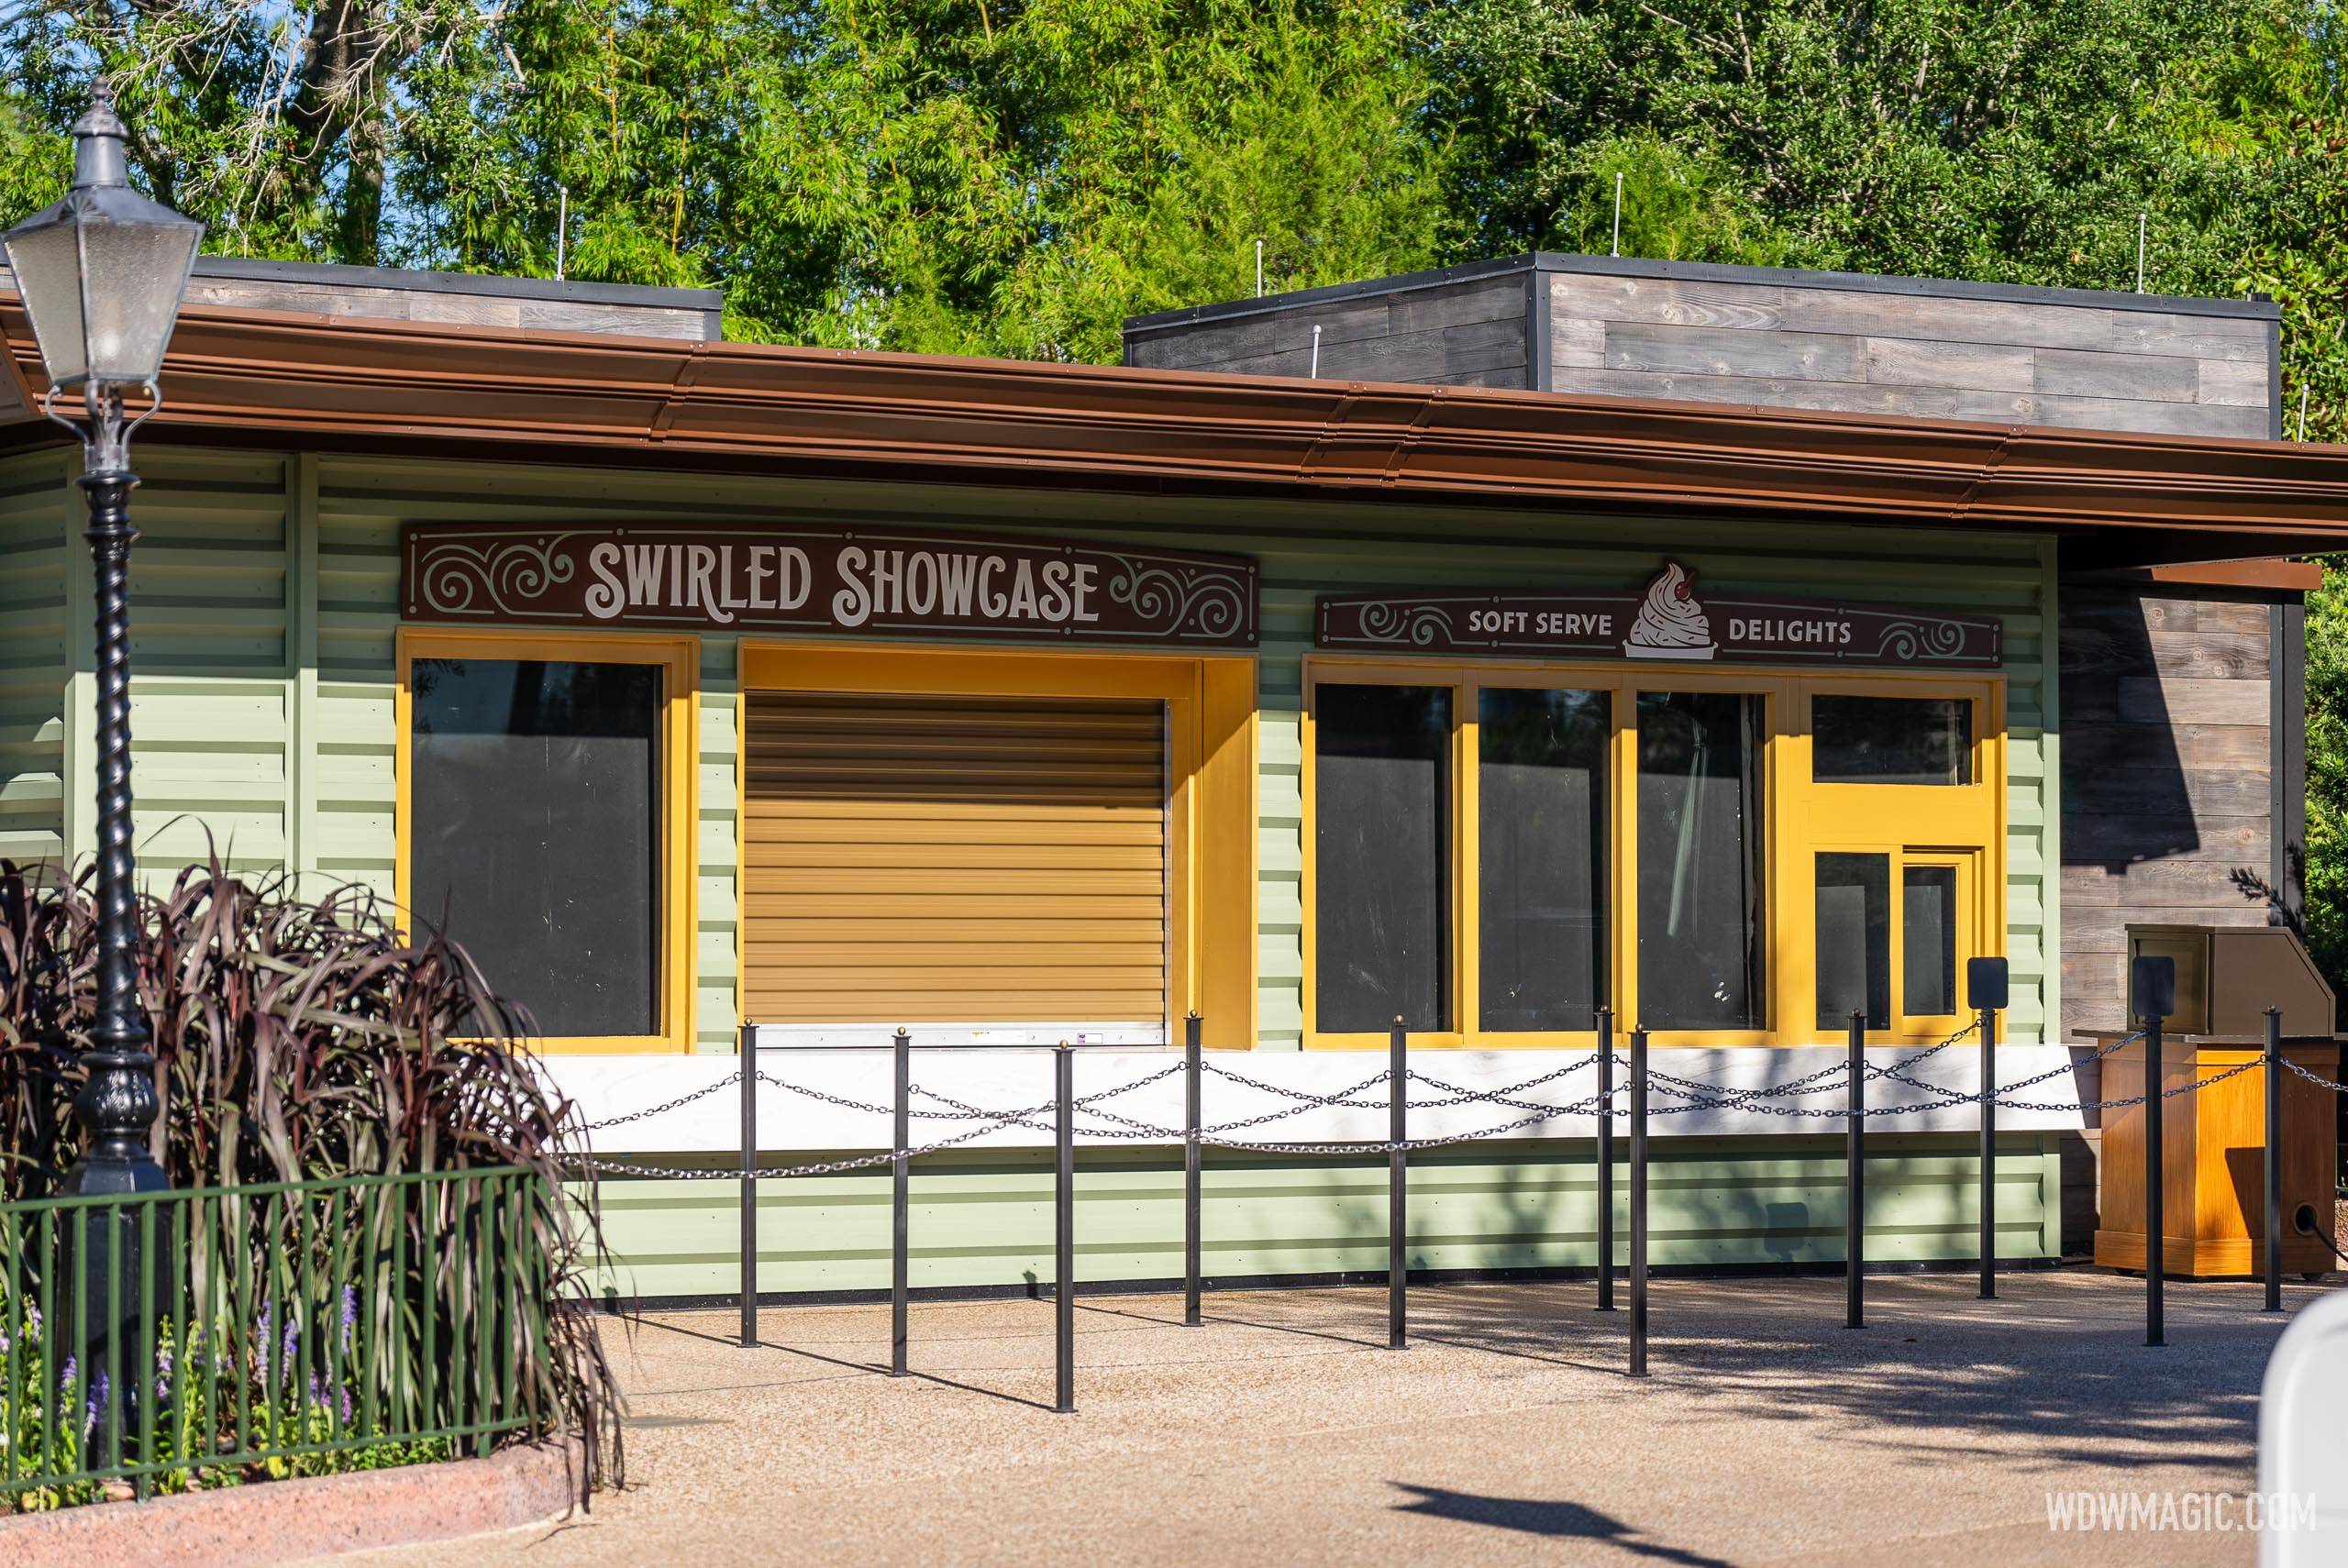 Signs go up at EPCOT's new soft-serve location Swirled Showcase